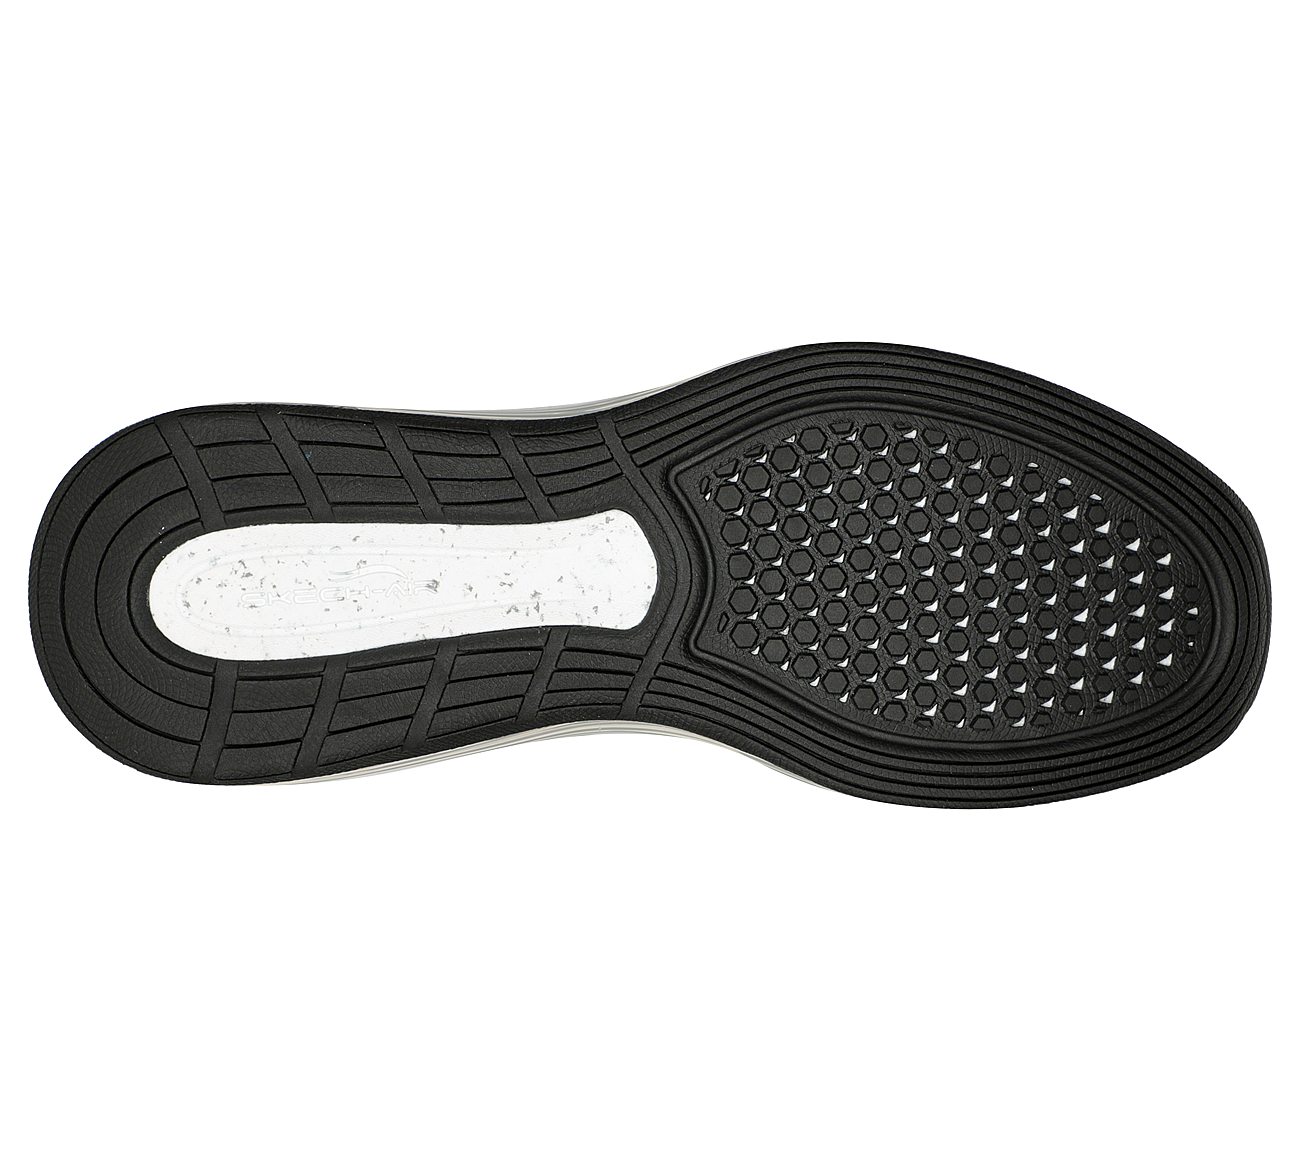 ARCH FIT ELEMENT AIR, BLACK/WHITE Footwear Bottom View